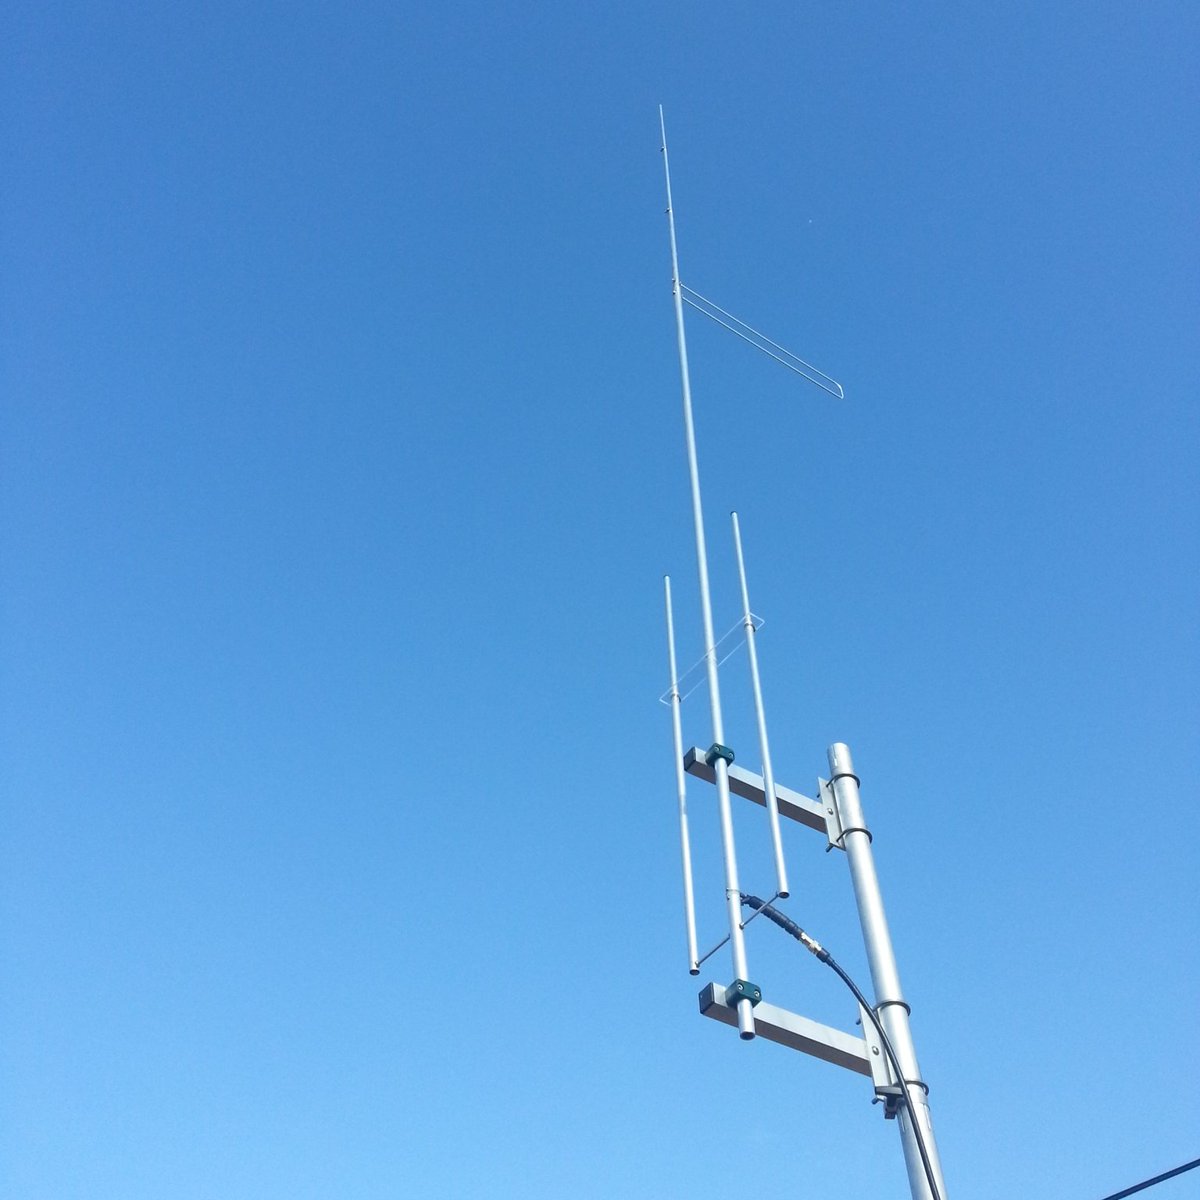 50MHz 'Forker' colinear vertical on test .. #50mhz #hamr #hamradio #innovantennas #g0ksc #antennas #vertical #AmateurRadio #6mband #dxing #contesting